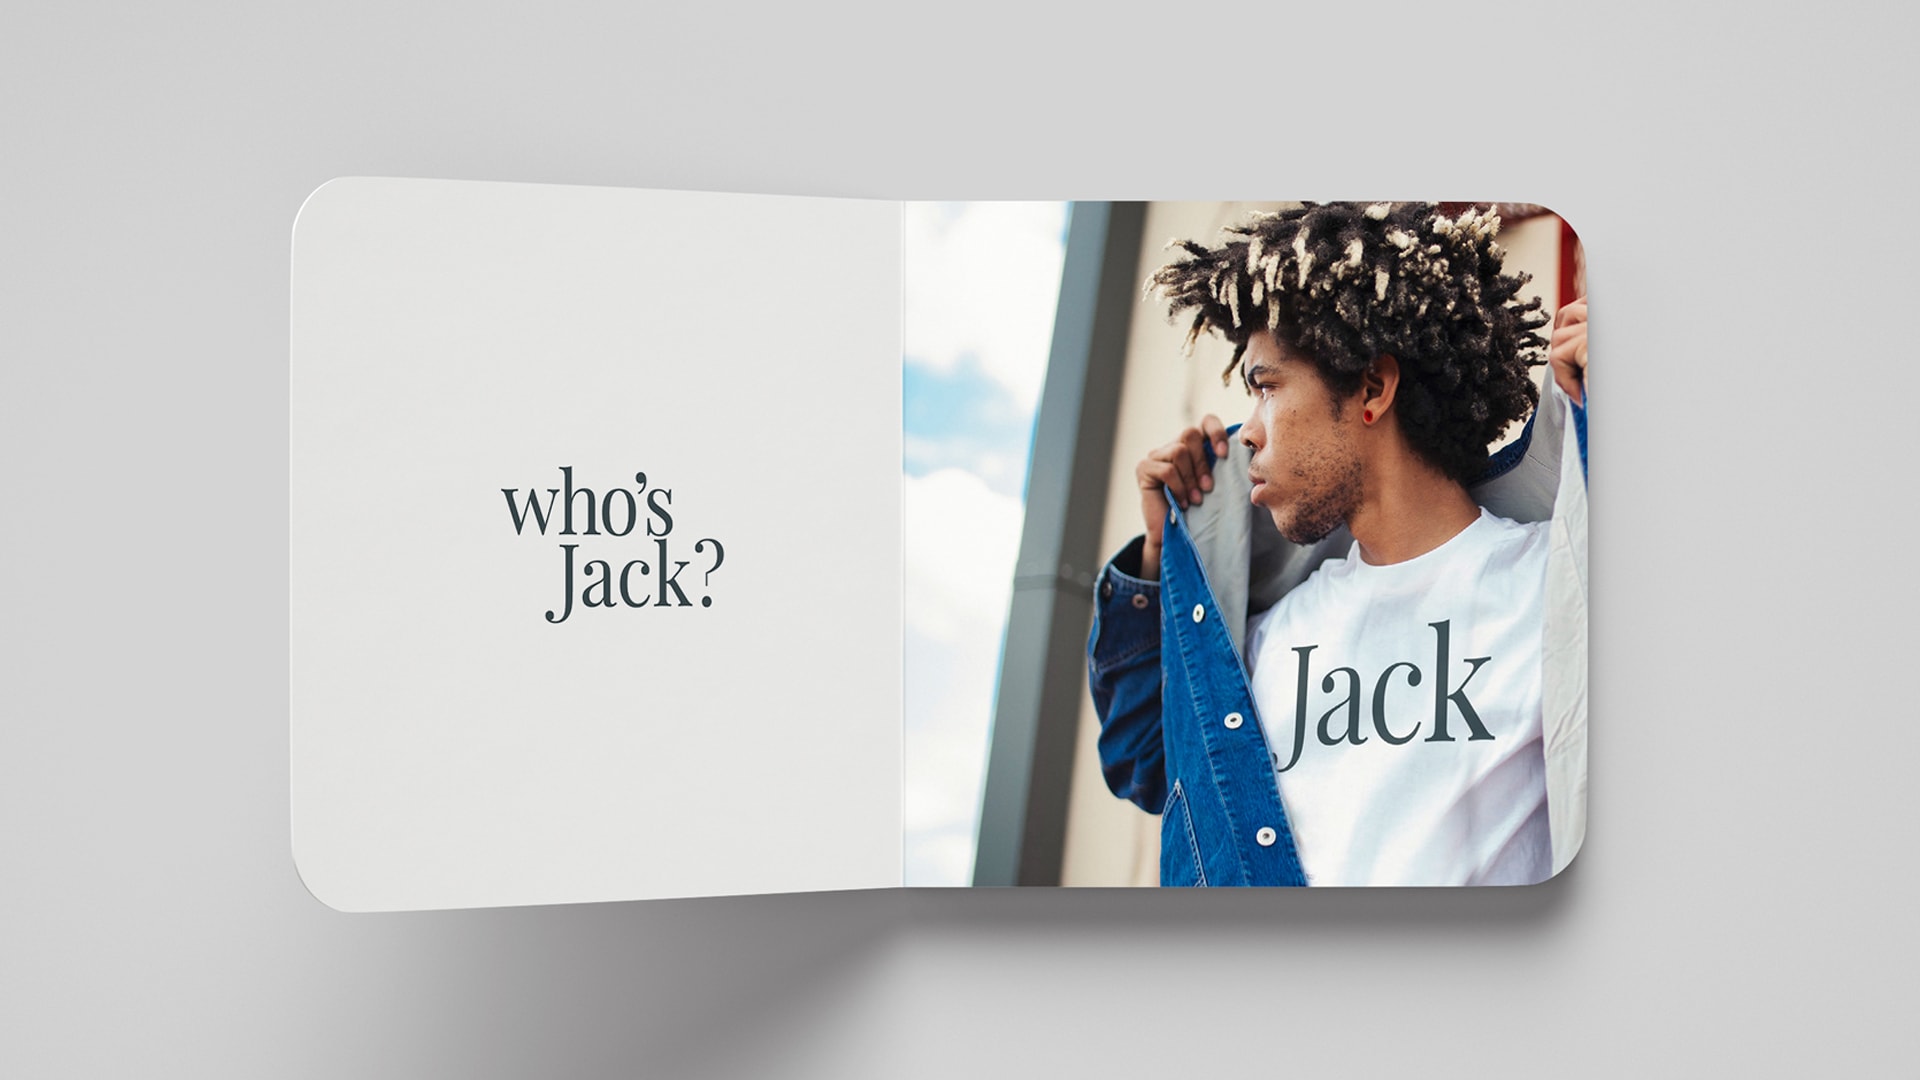 An image of a book cover design for a brand called Beanstalk. The design shows a man wearing a T-shirt printed with the name 'Jack' and displays the words 'Who's Jack?'